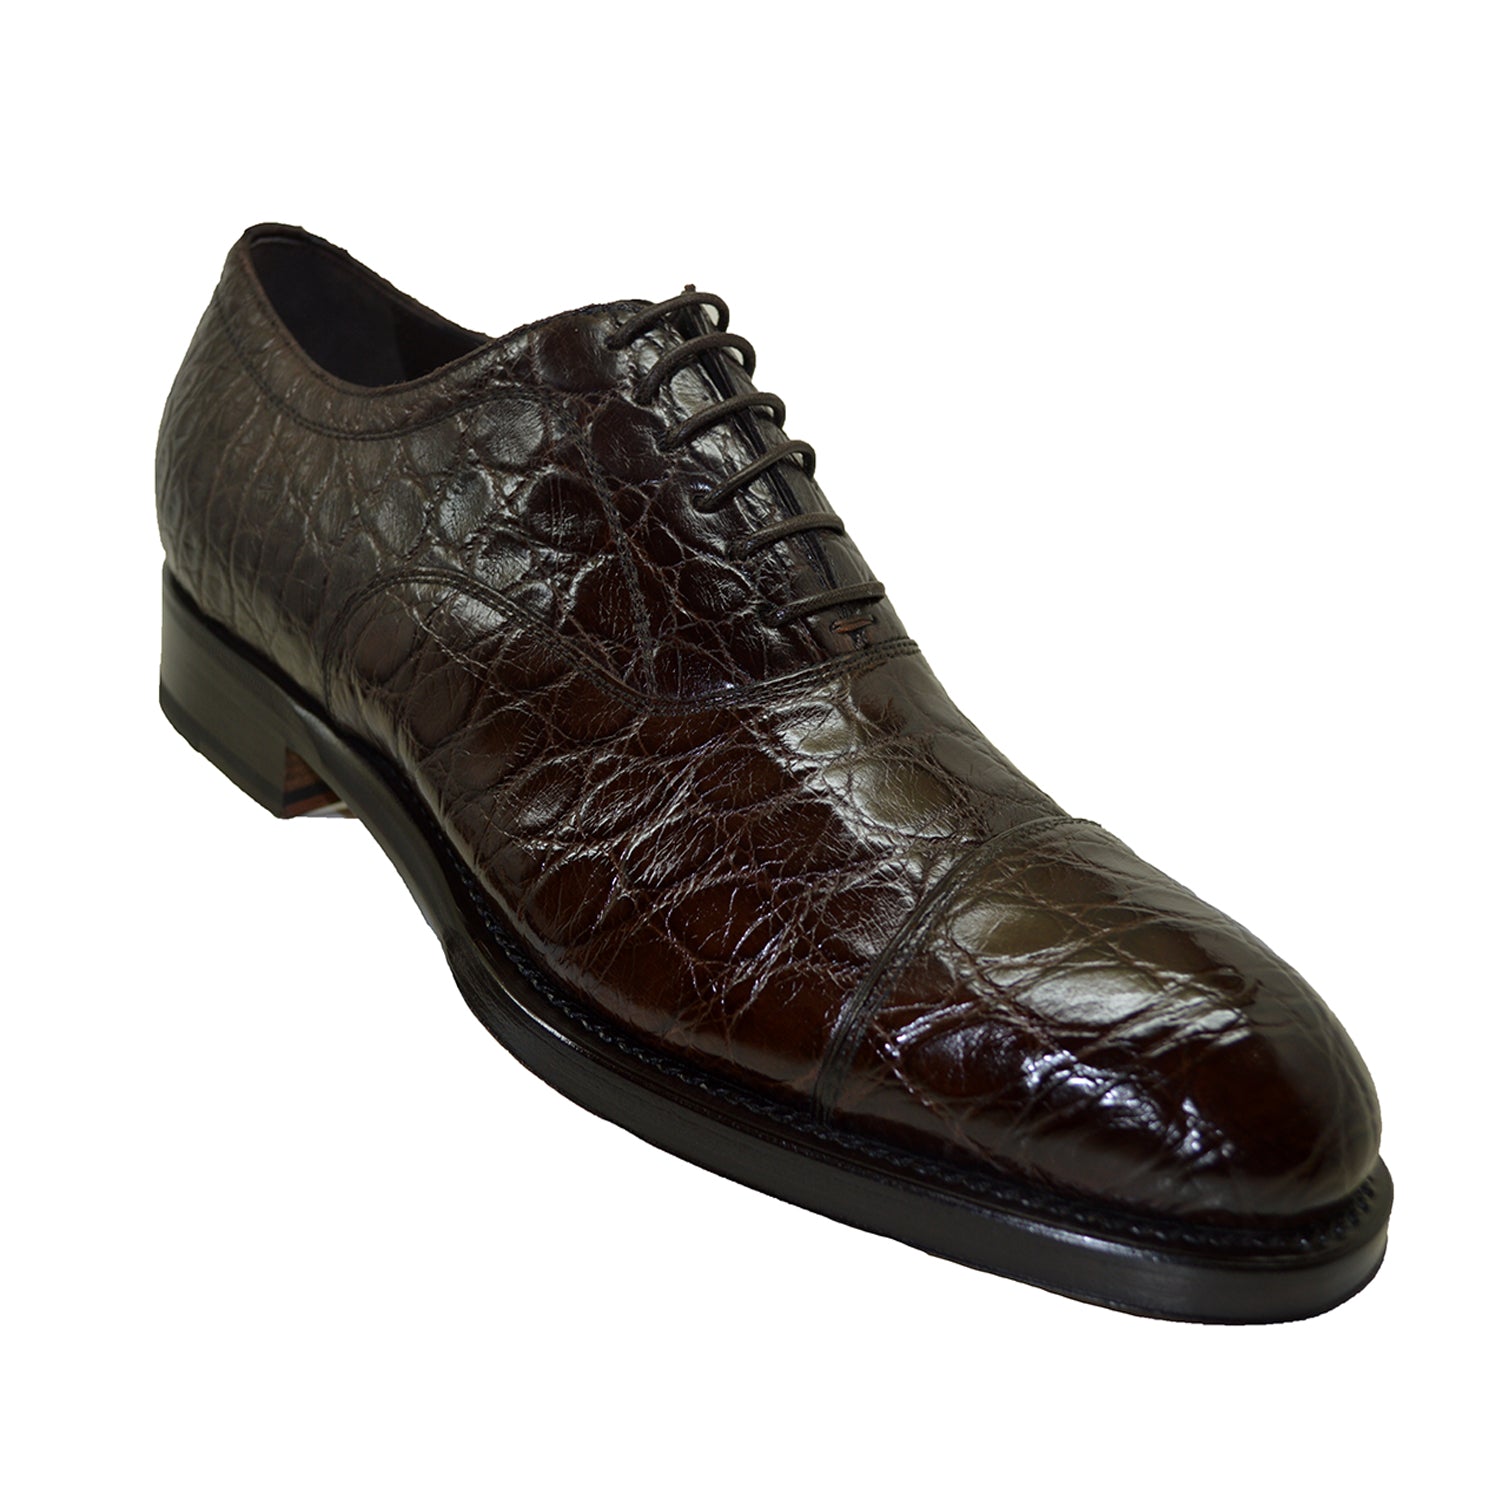 Caporicci 5950 Alligator Flanks Lace Up Brown